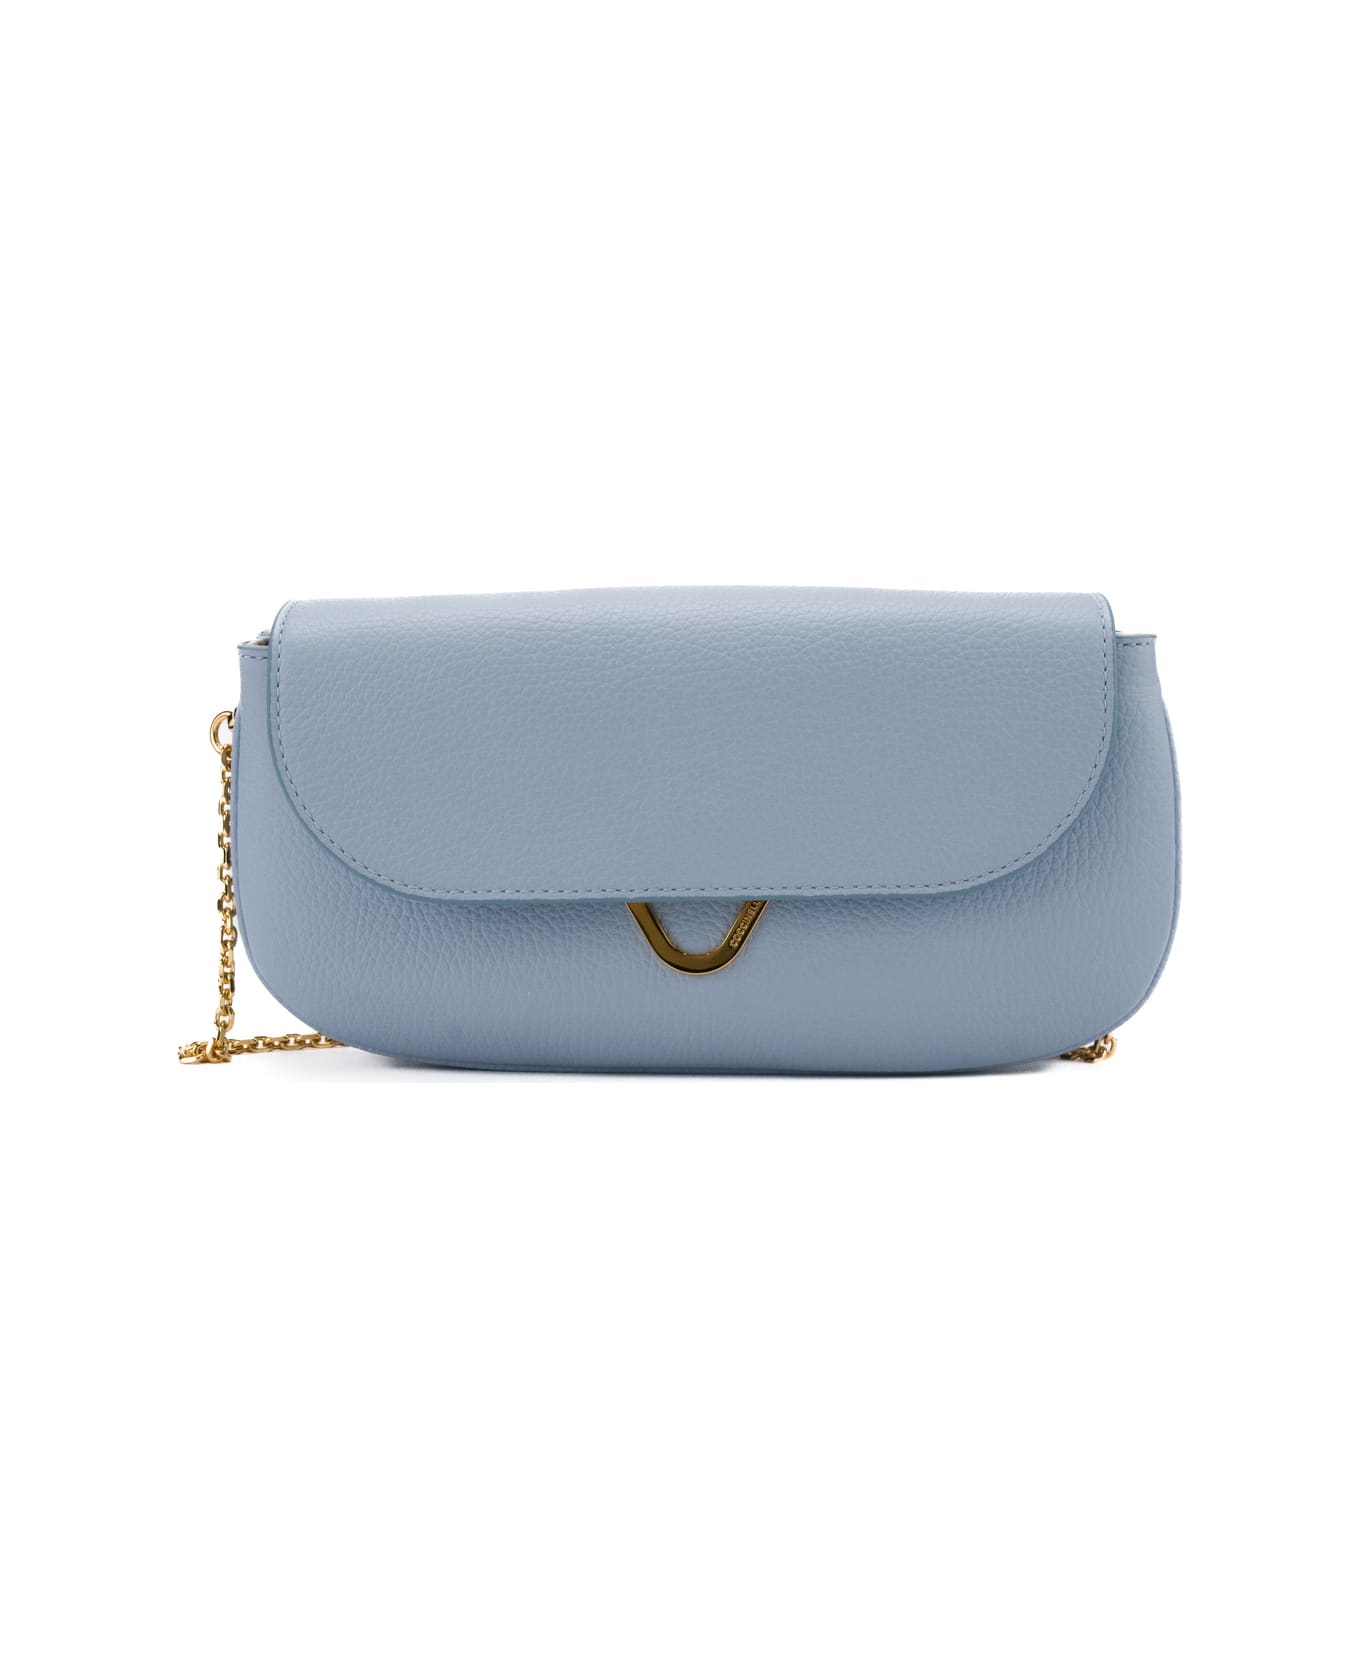 Coccinelle Dew Leather Bag - Blue トートバッグ